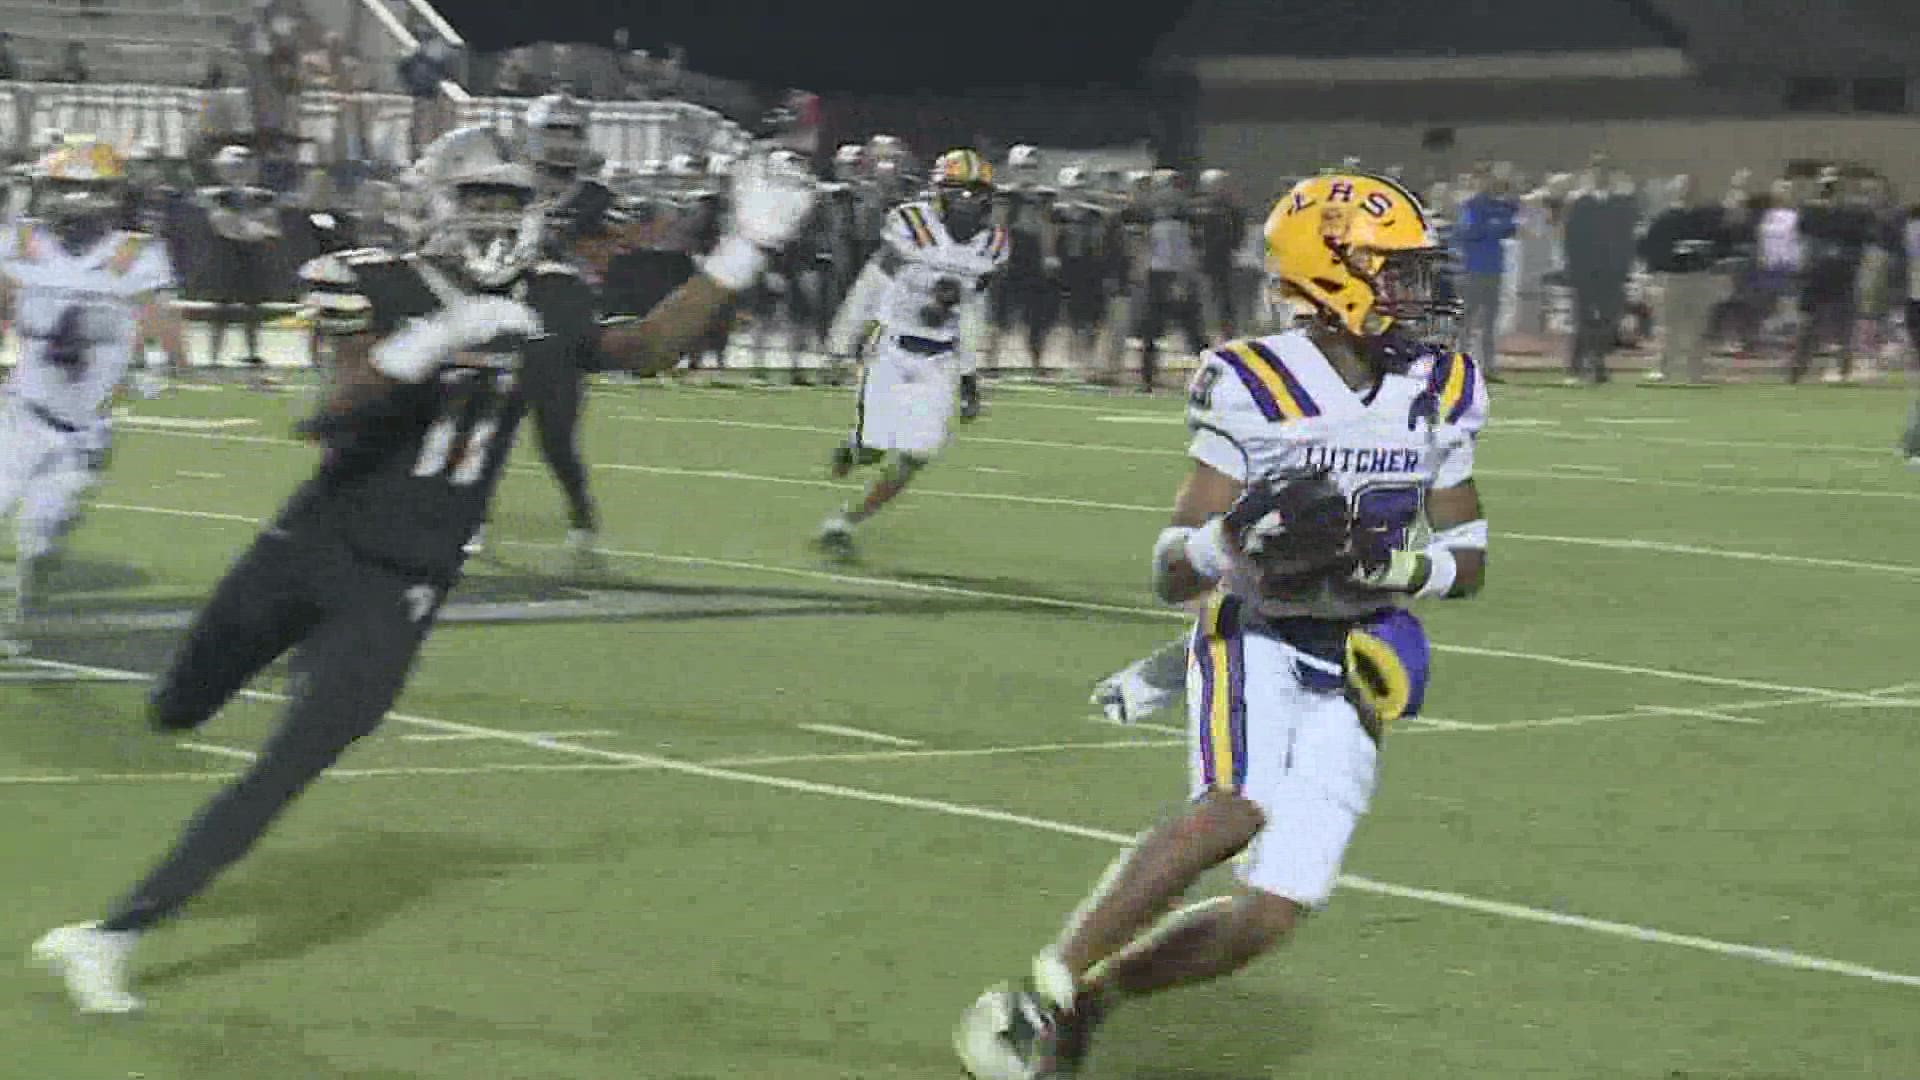 Lutcher bested Lakeshore, 45-8.